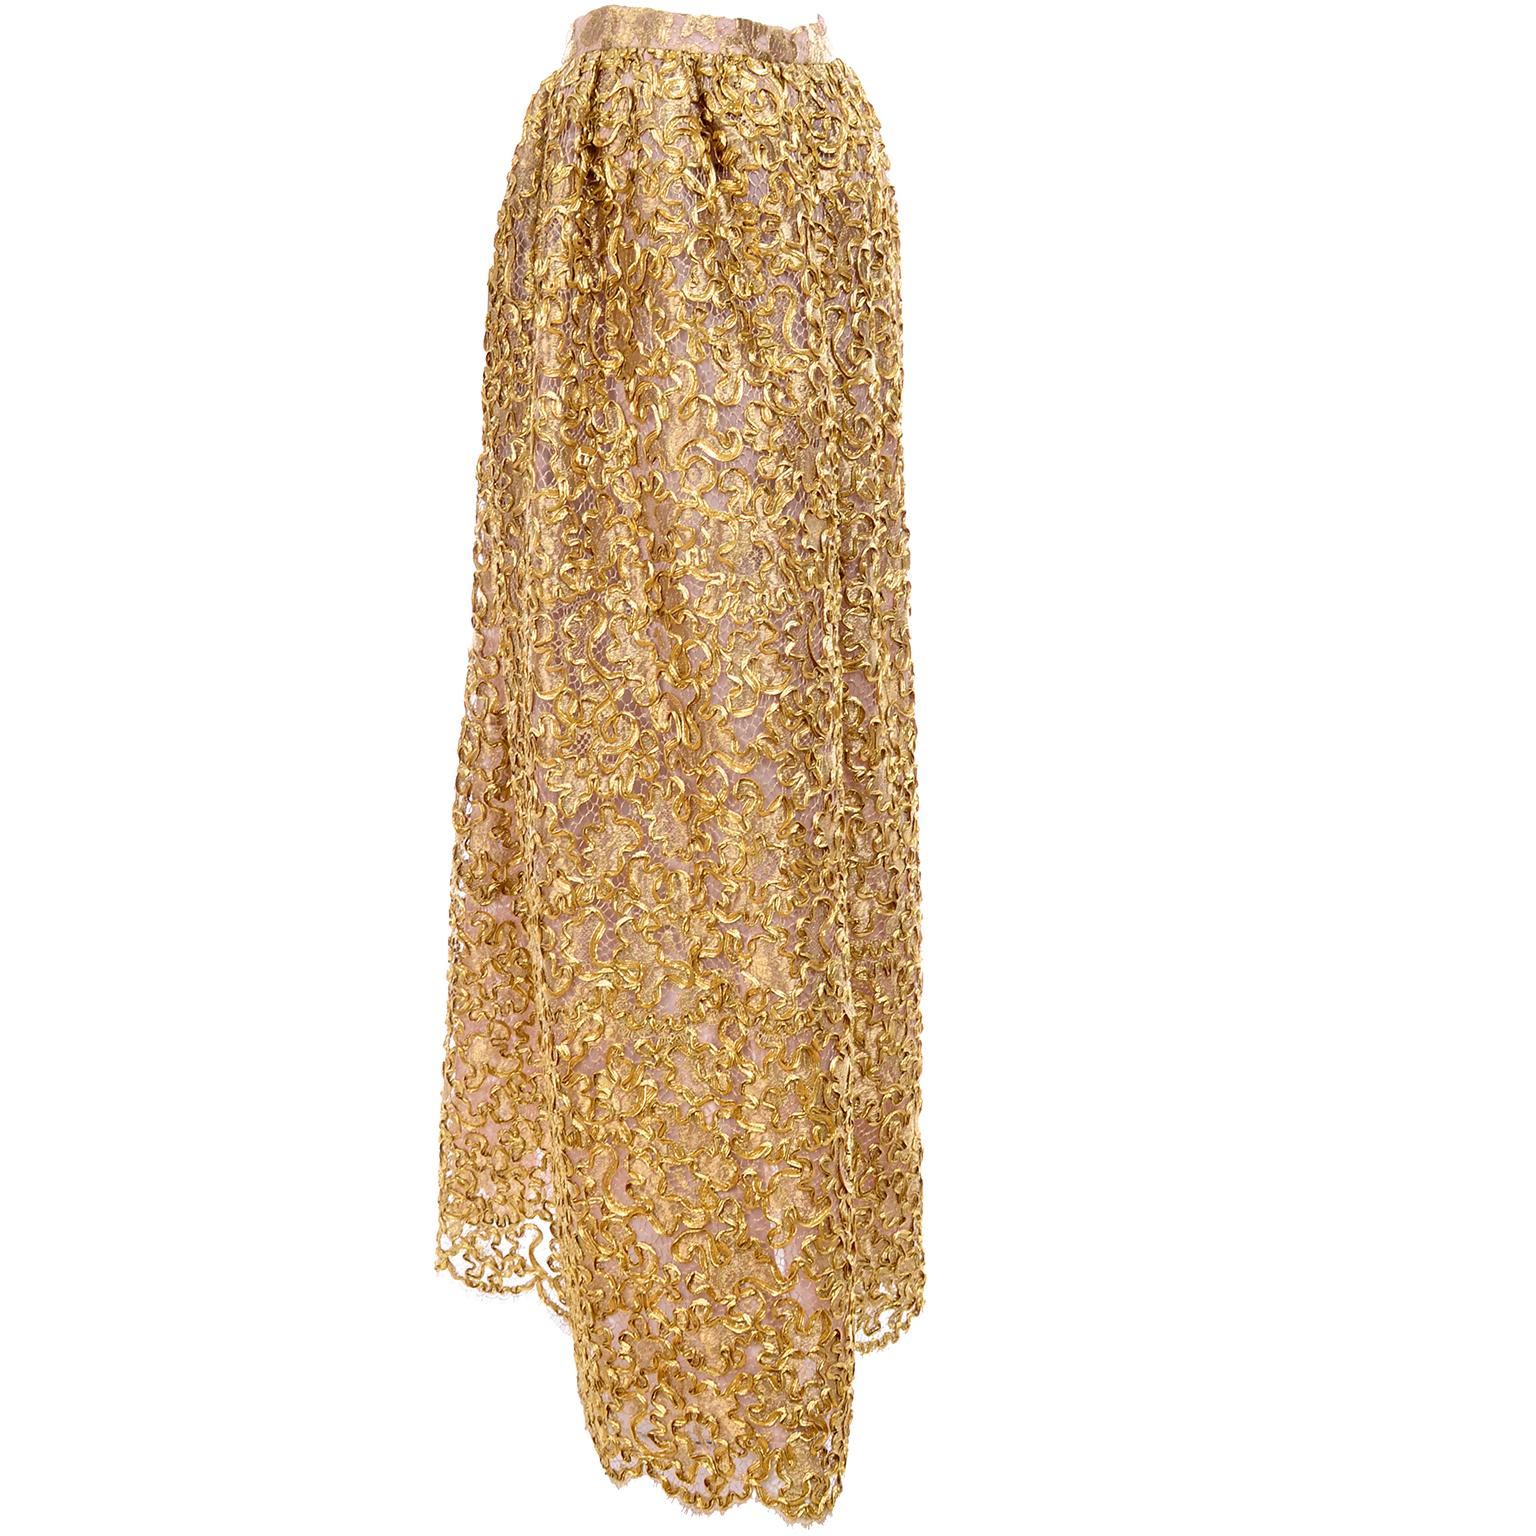 This is the most stunning vintage Mary McFadden Couture vintage skirt that was purchased at Saks Fifth Avenue in the 1980's. The long evening skirt is in a beautiful gold fabric with soutache over lace with a nude lining.  The skirt still has its